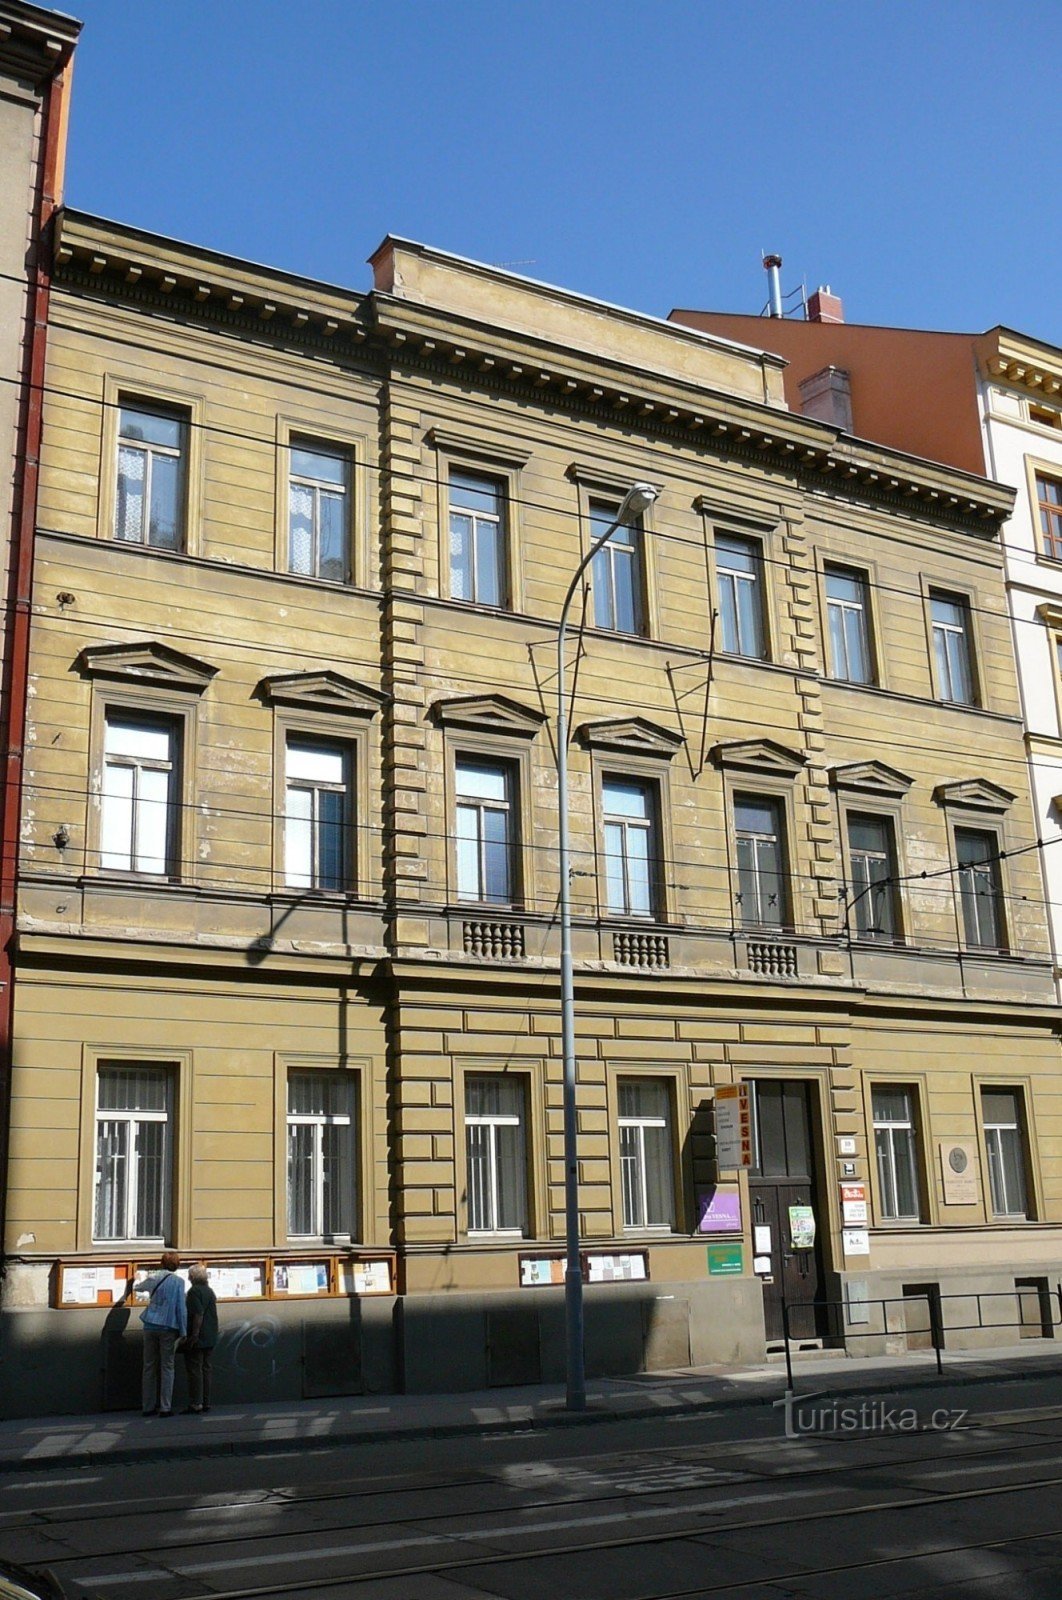 The house at Údolní 10, where the Vesna association still resides today and Jurkovič's room can be viewed here